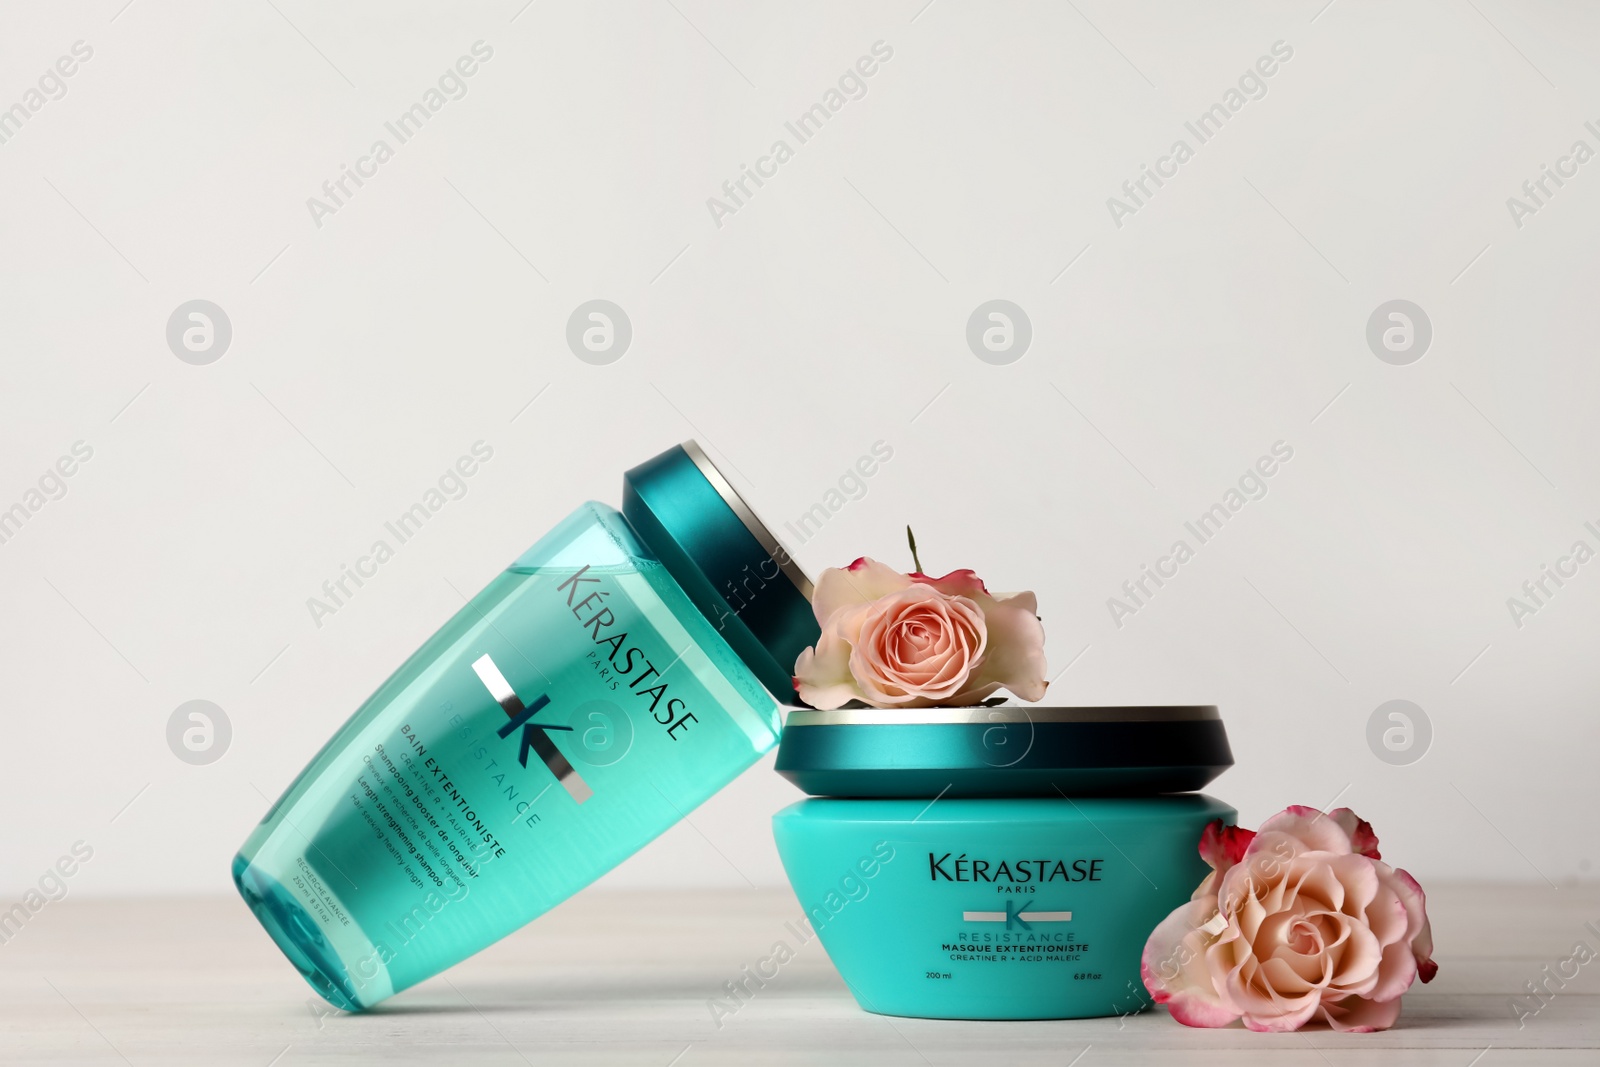 Photo of MYKOLAIV, UKRAINE - SEPTEMBER 07, 2021: Kerastase hair care cosmetic products and beautiful flowers on white wooden table